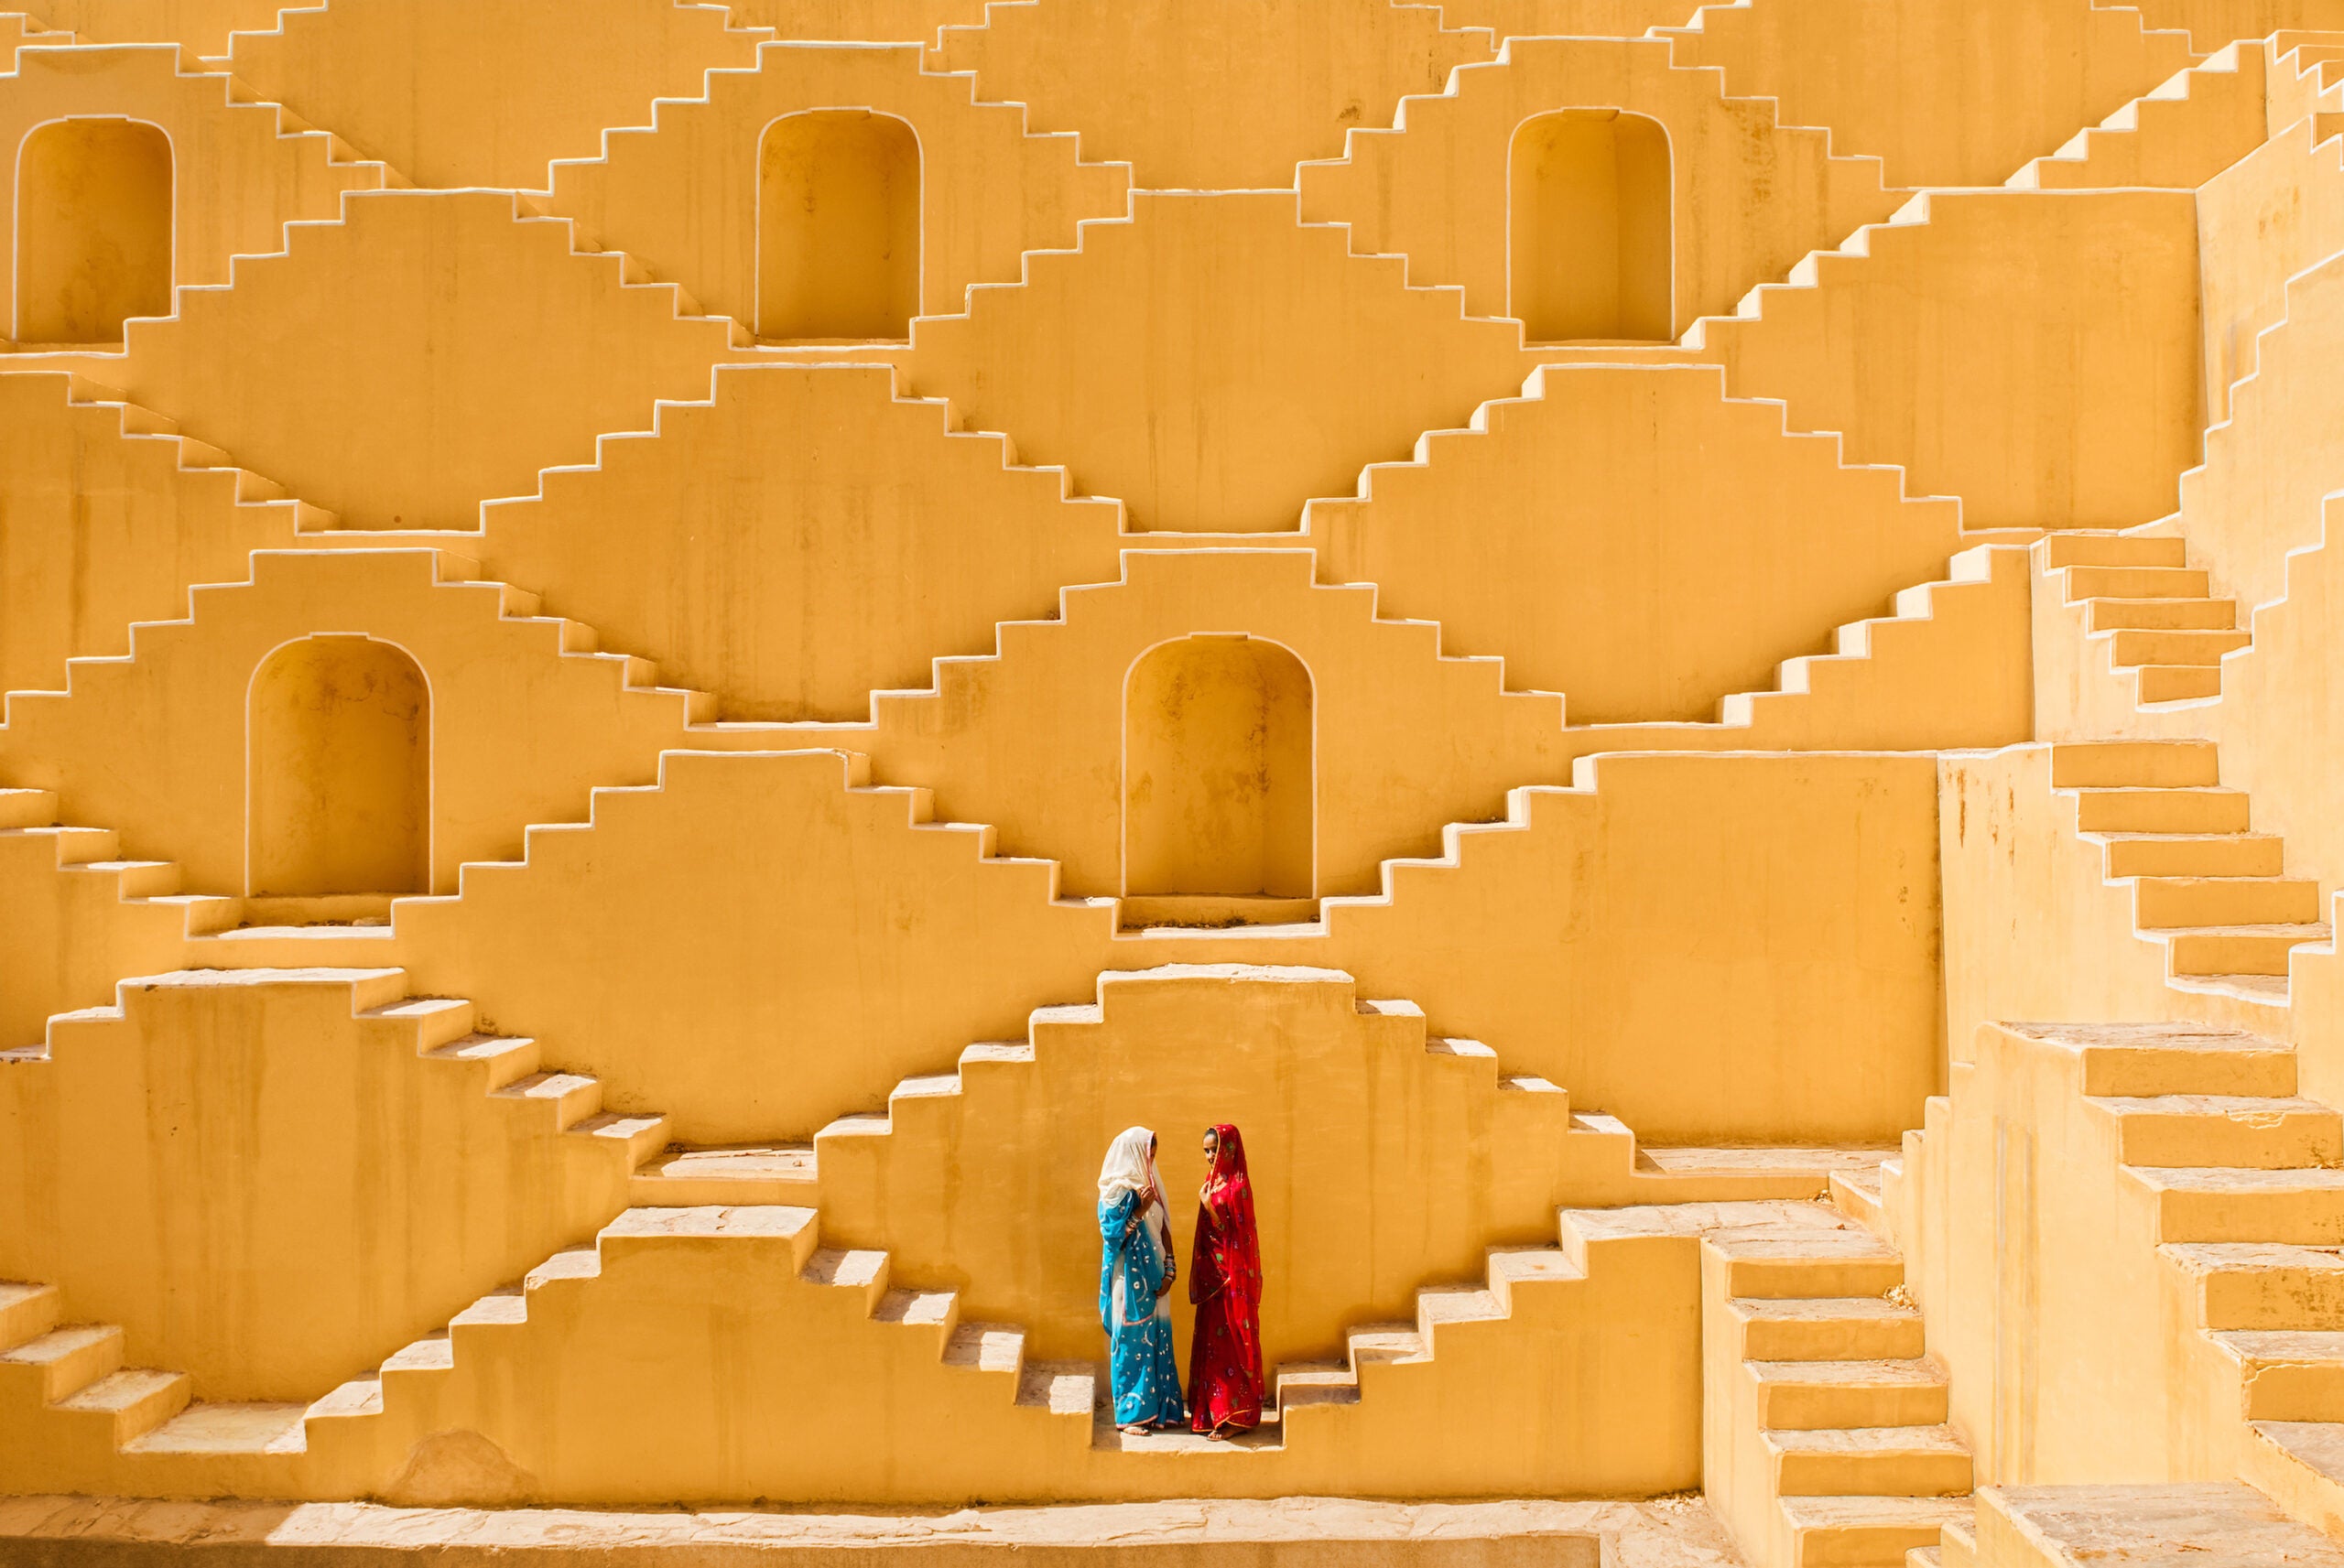 In this photo Manisha and Jasmin Singh pause in the Baoli, an ancient step well in a village near the city of Jaipur outside of Indiaâs Thar desert.